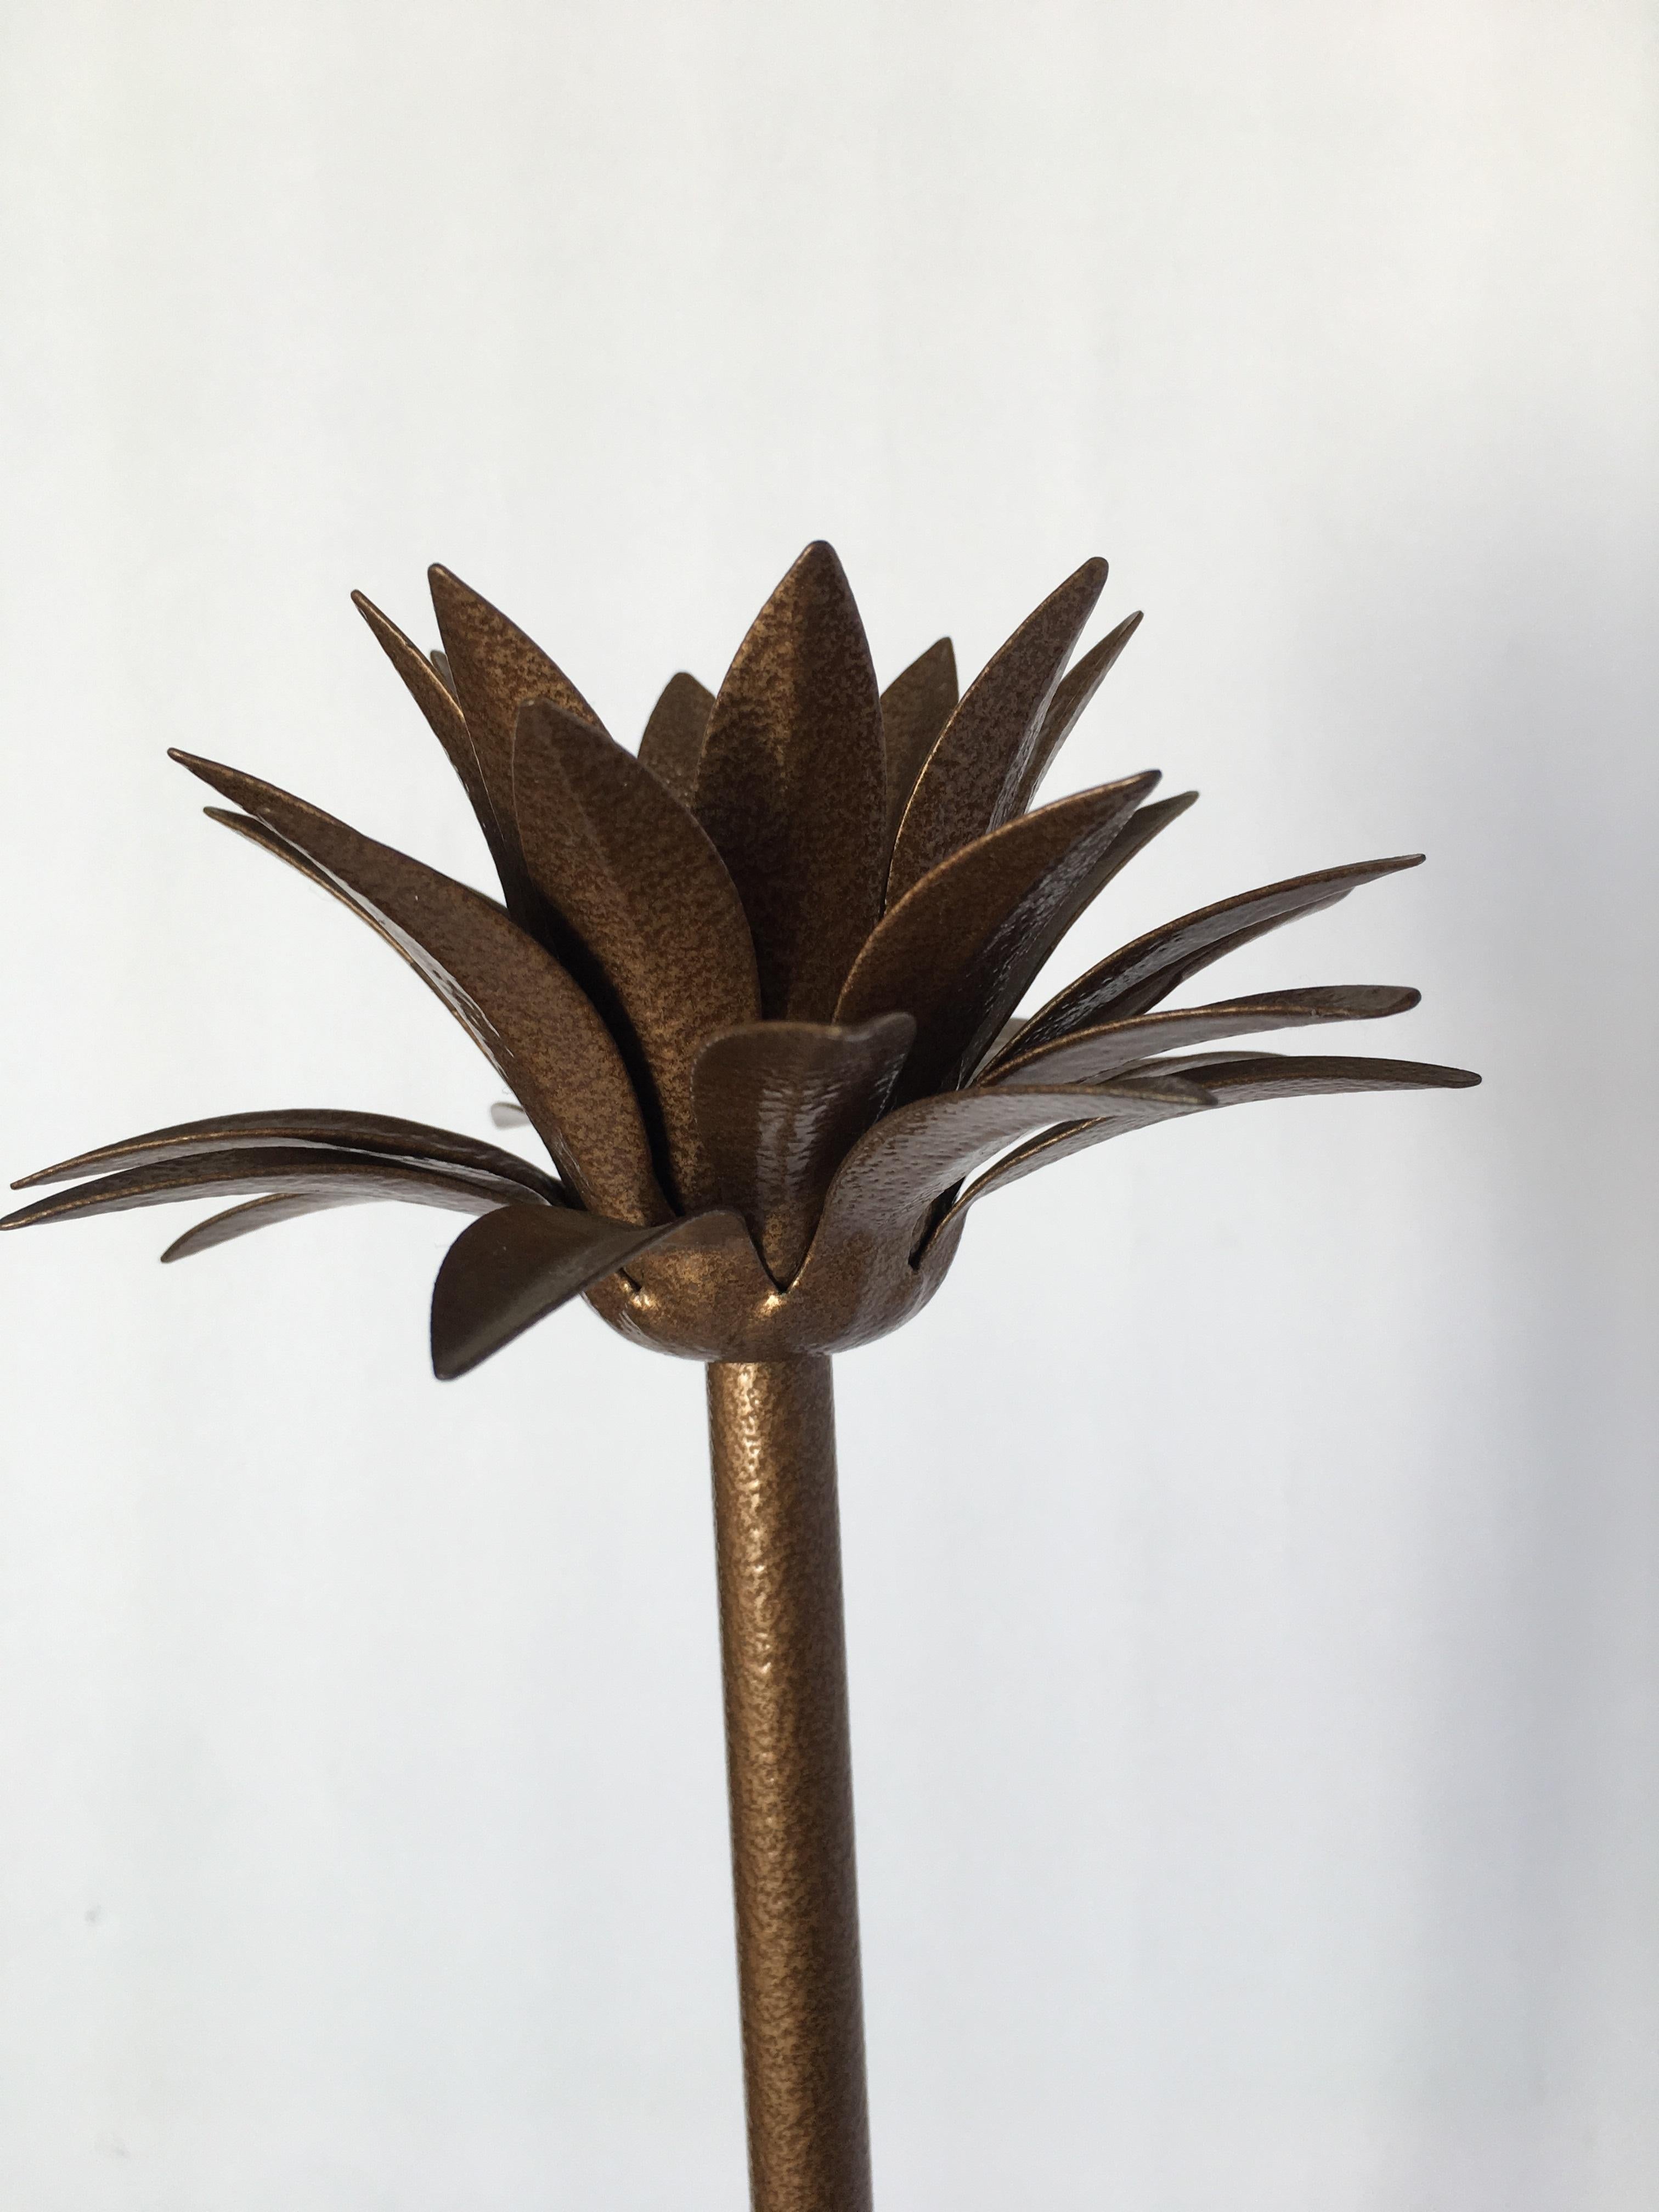 Art Deco style palm leaf candlestick holder with a faux bronze finish.